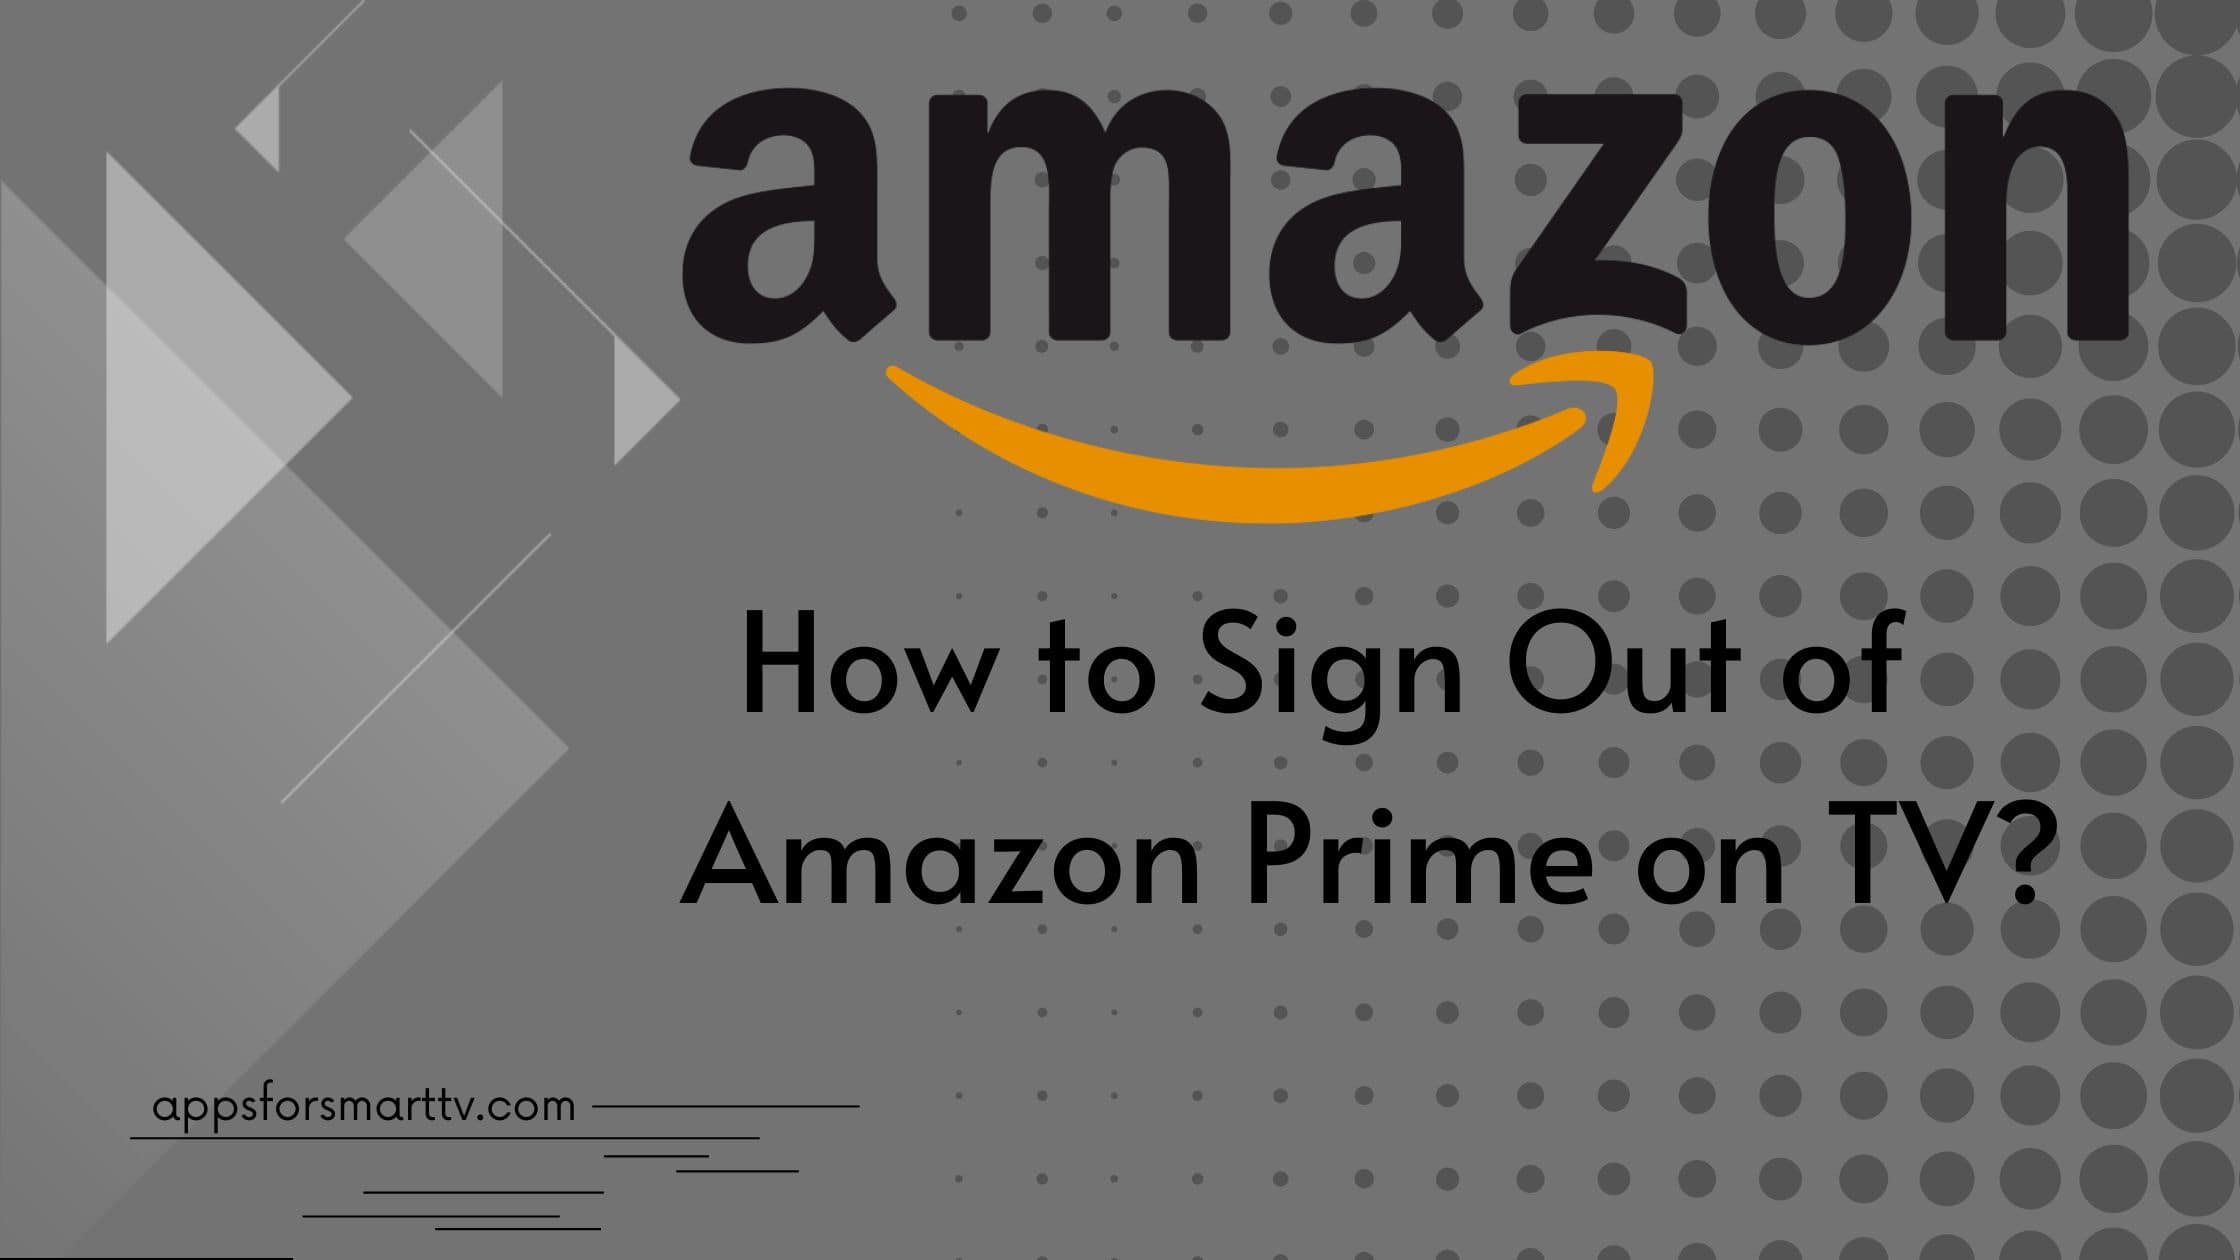 How to Sign Out of Amazon Prime on TV [2 Simple Ways]